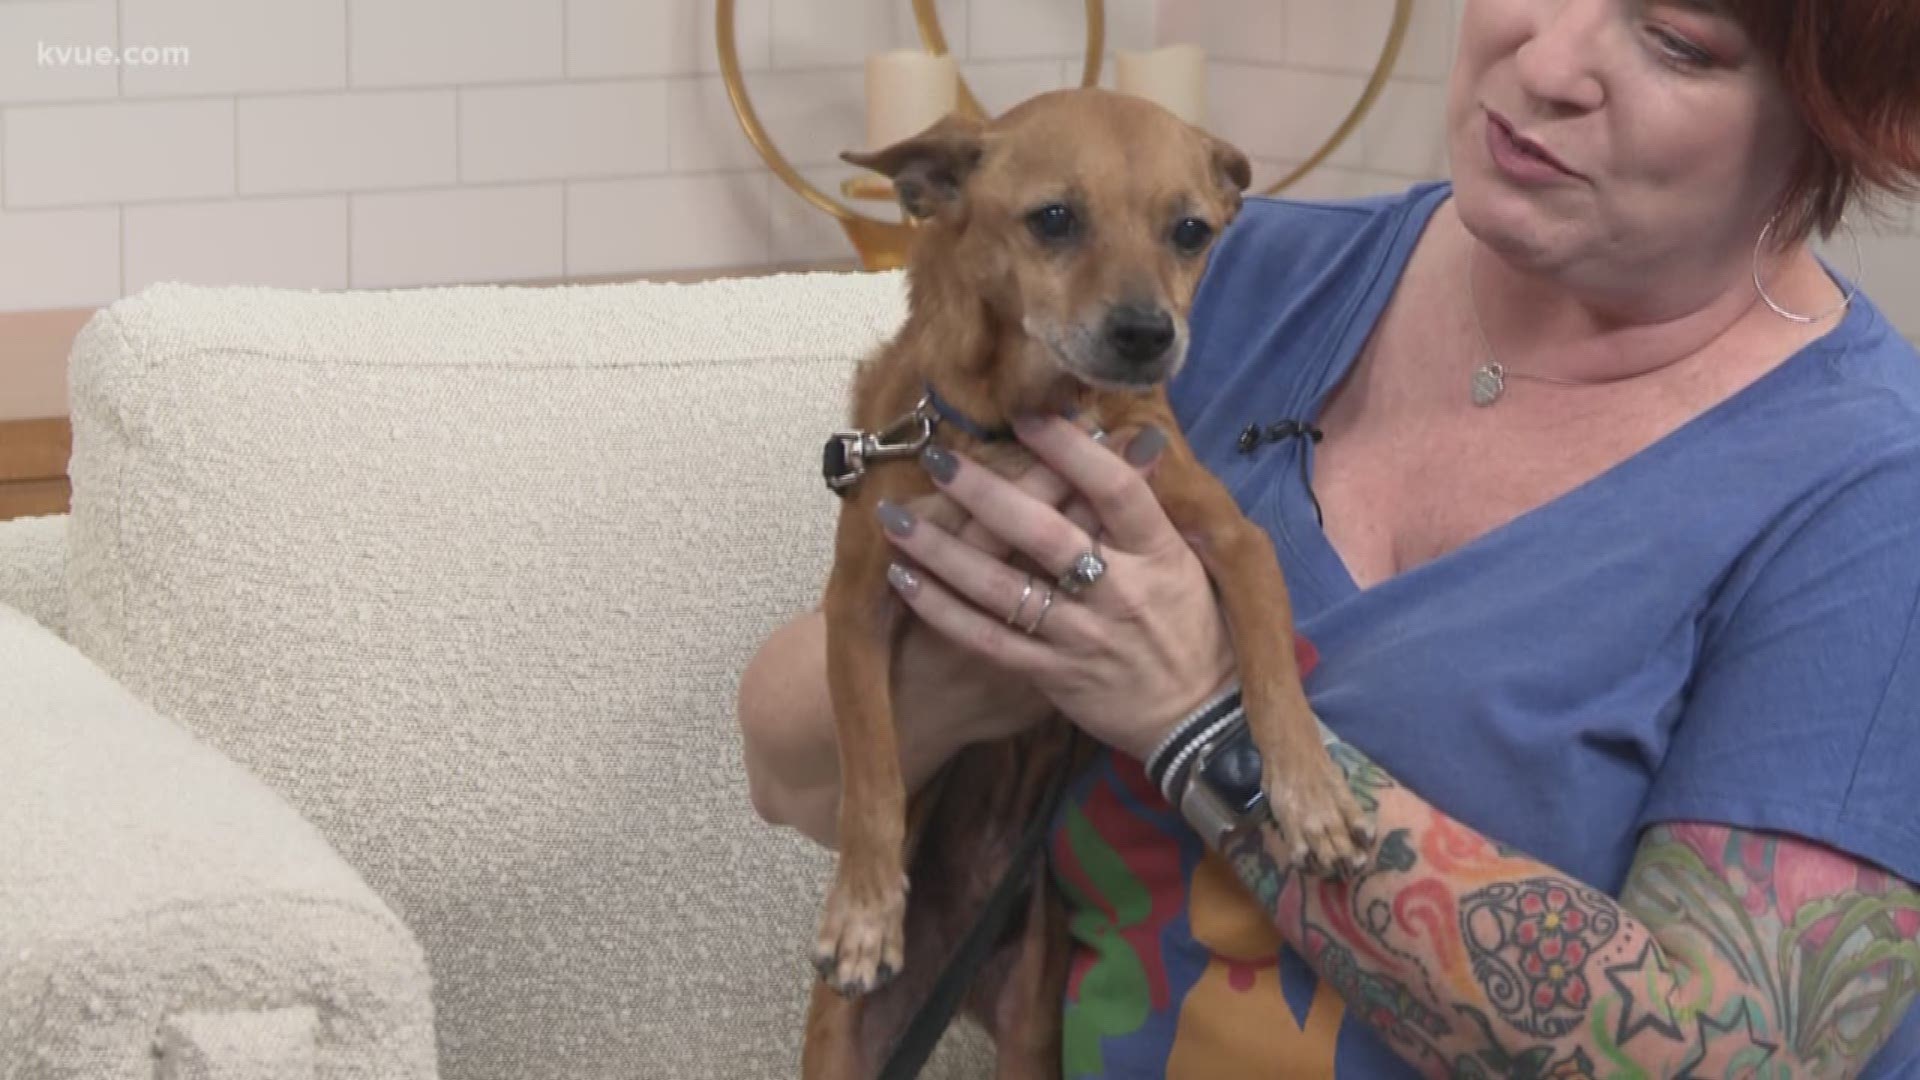 Summer Huggins with the Austin Animal Center has brought along Cappy, who – along with all animals at the shelter – is free to adopt this Valentine's Day weekend!